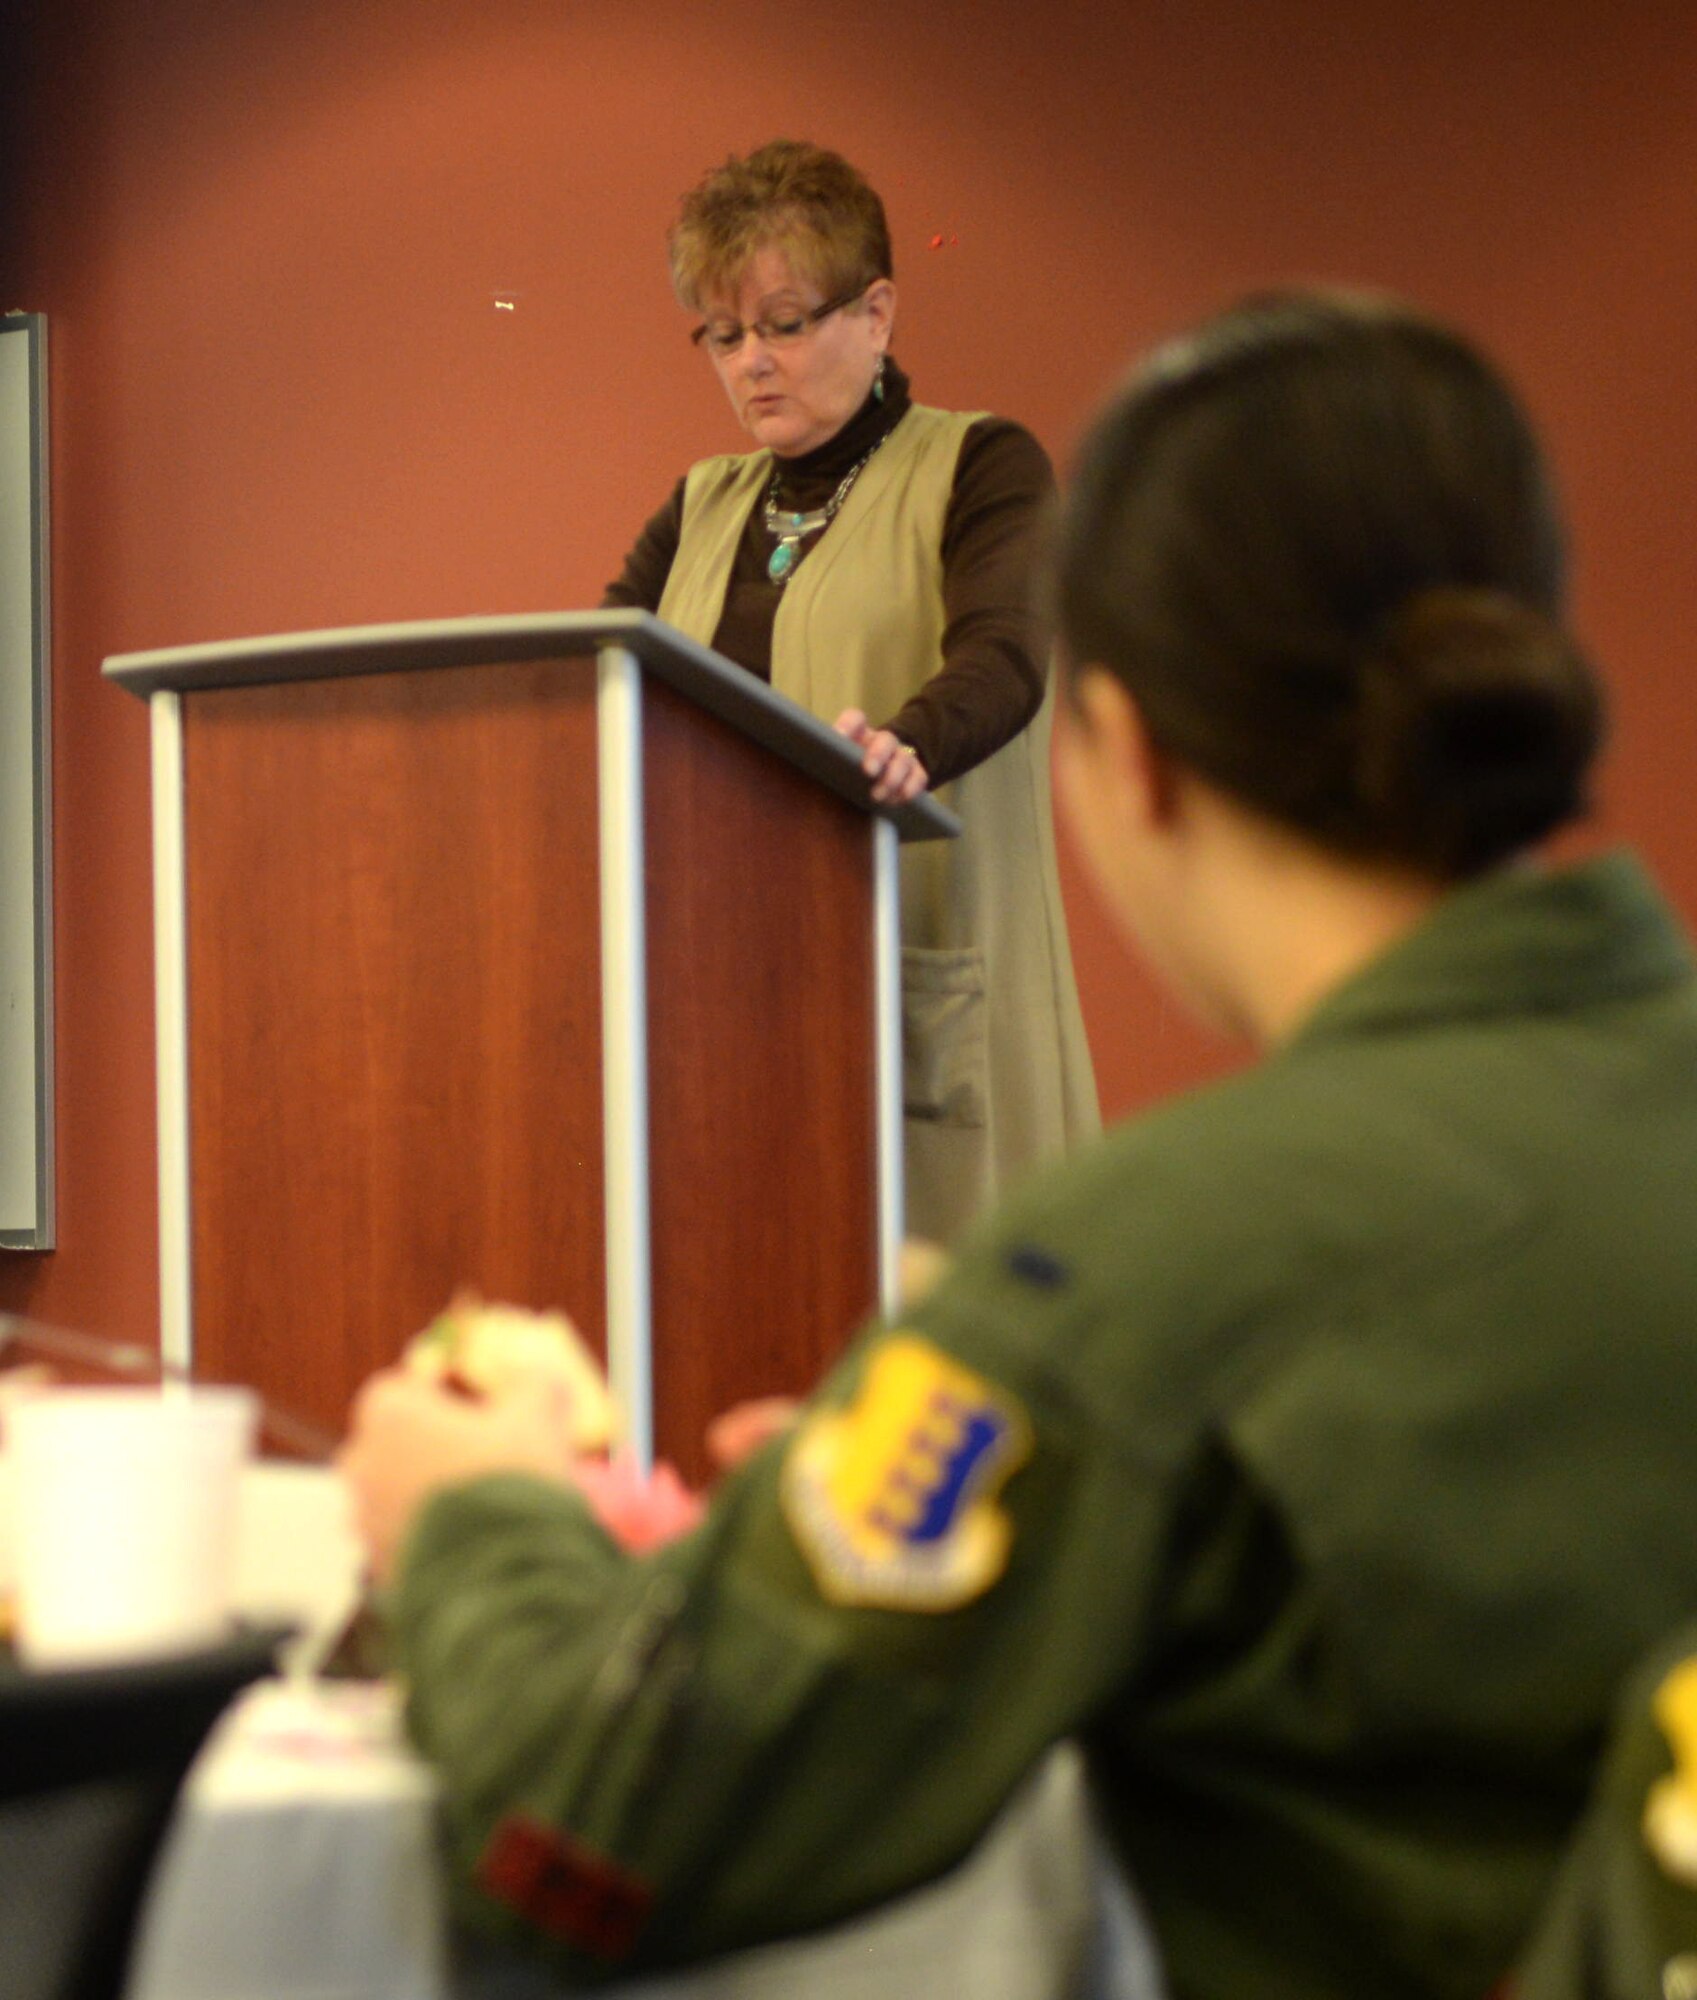 Donna Roebuck, a retired U.S. Army master sergeant, speaks during a Women’s History Month luncheon inside the Deployment Center at Ellsworth Air Force Base, S.D., March 21, 2017. Each year, Ellsworth hosts a luncheon to reflect and highlight the accomplishments of women, in the past and present, for their contributions to the fight for equality and justice. (U.S. Air Force photo by Airman 1st Class Denise M. Jenson)